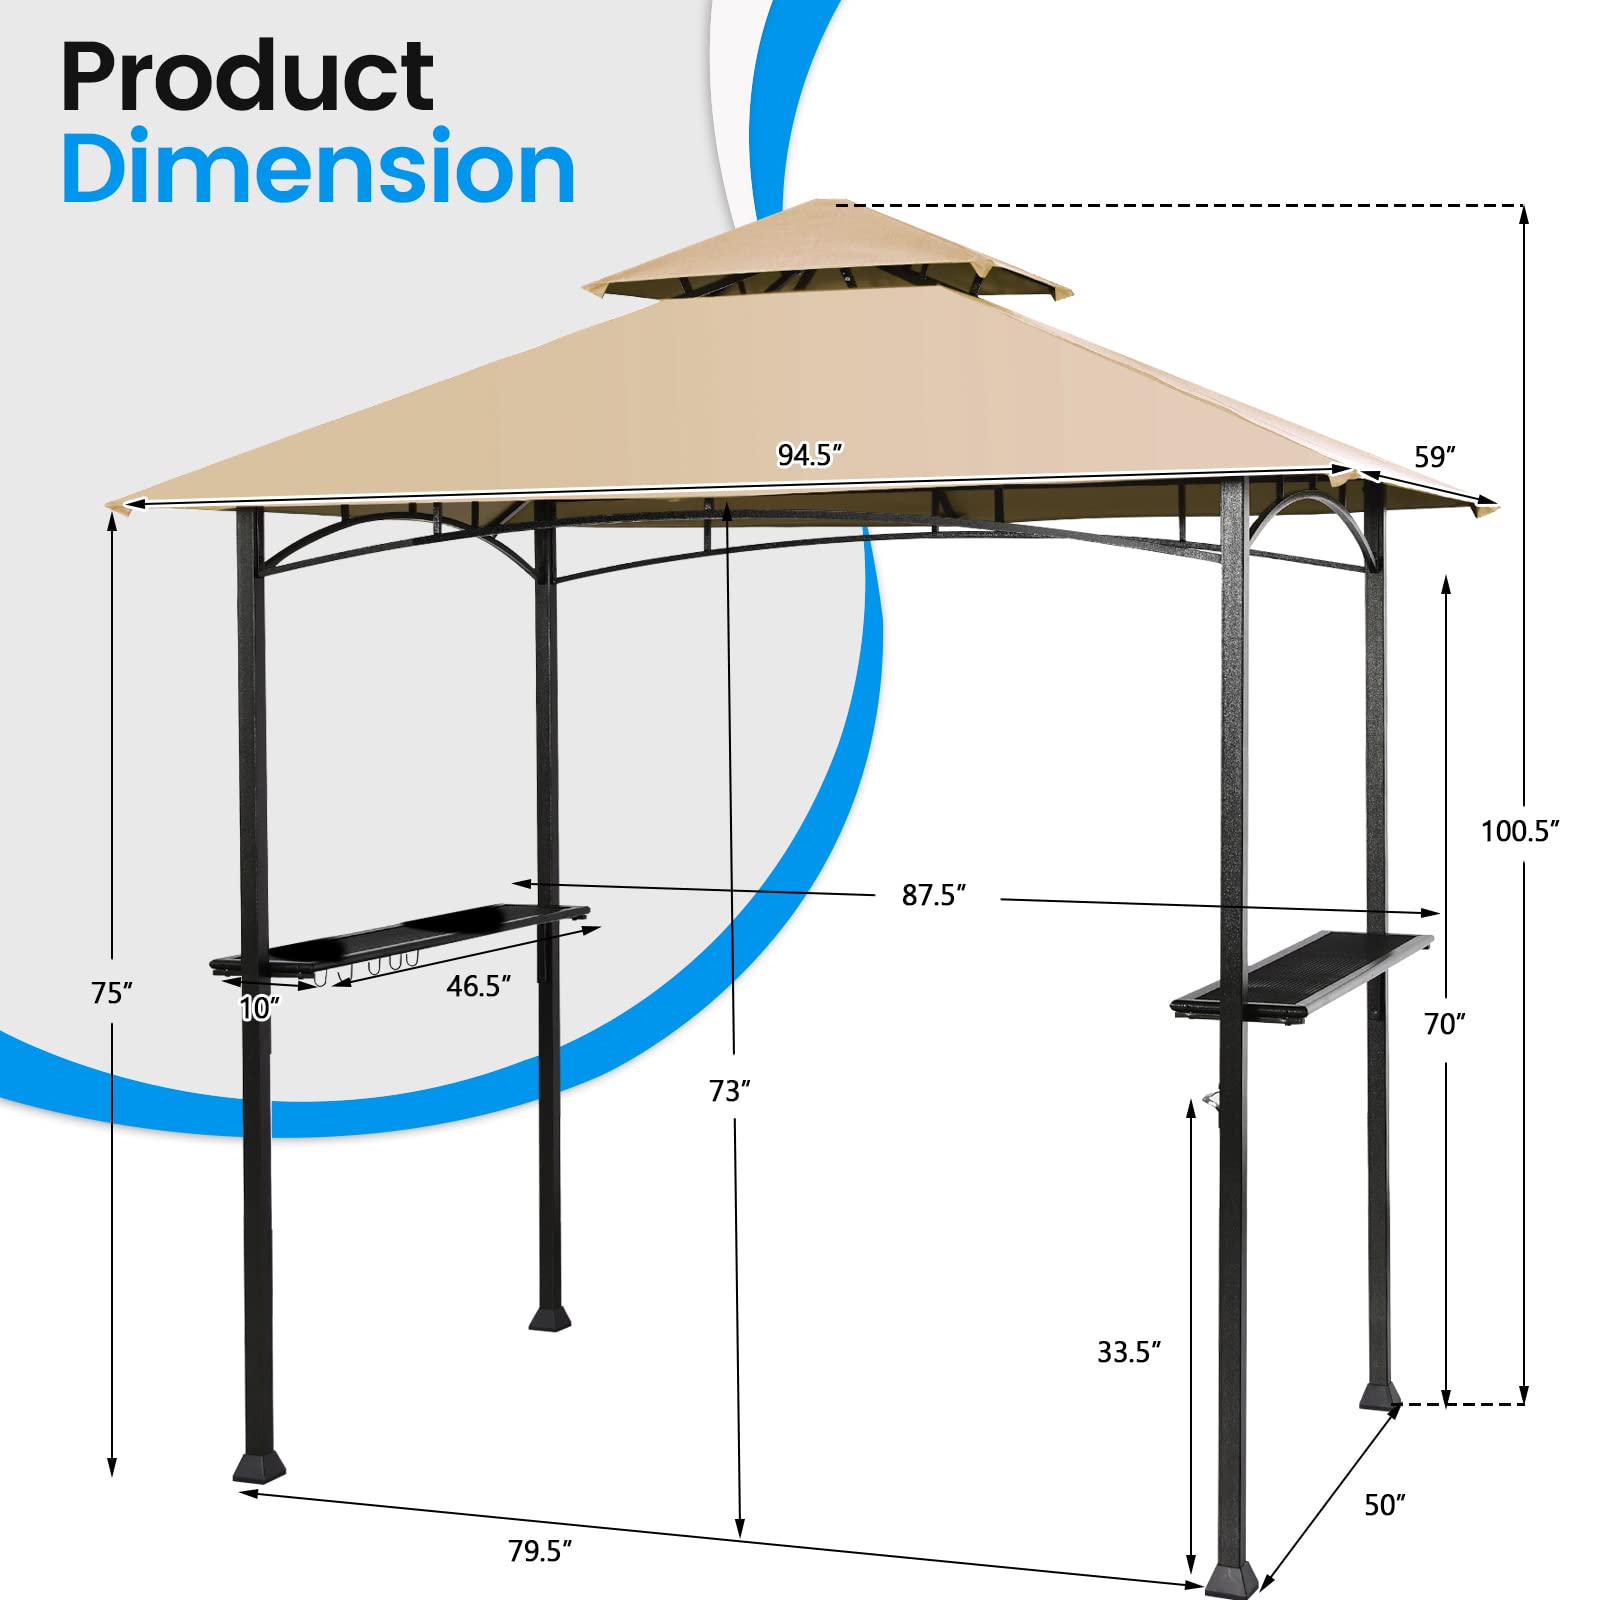 Giantex Grill Gazebo, 8ft x 5ft Grill Station with Canopy, Outdoor Grill Shelter Barbecue Tent